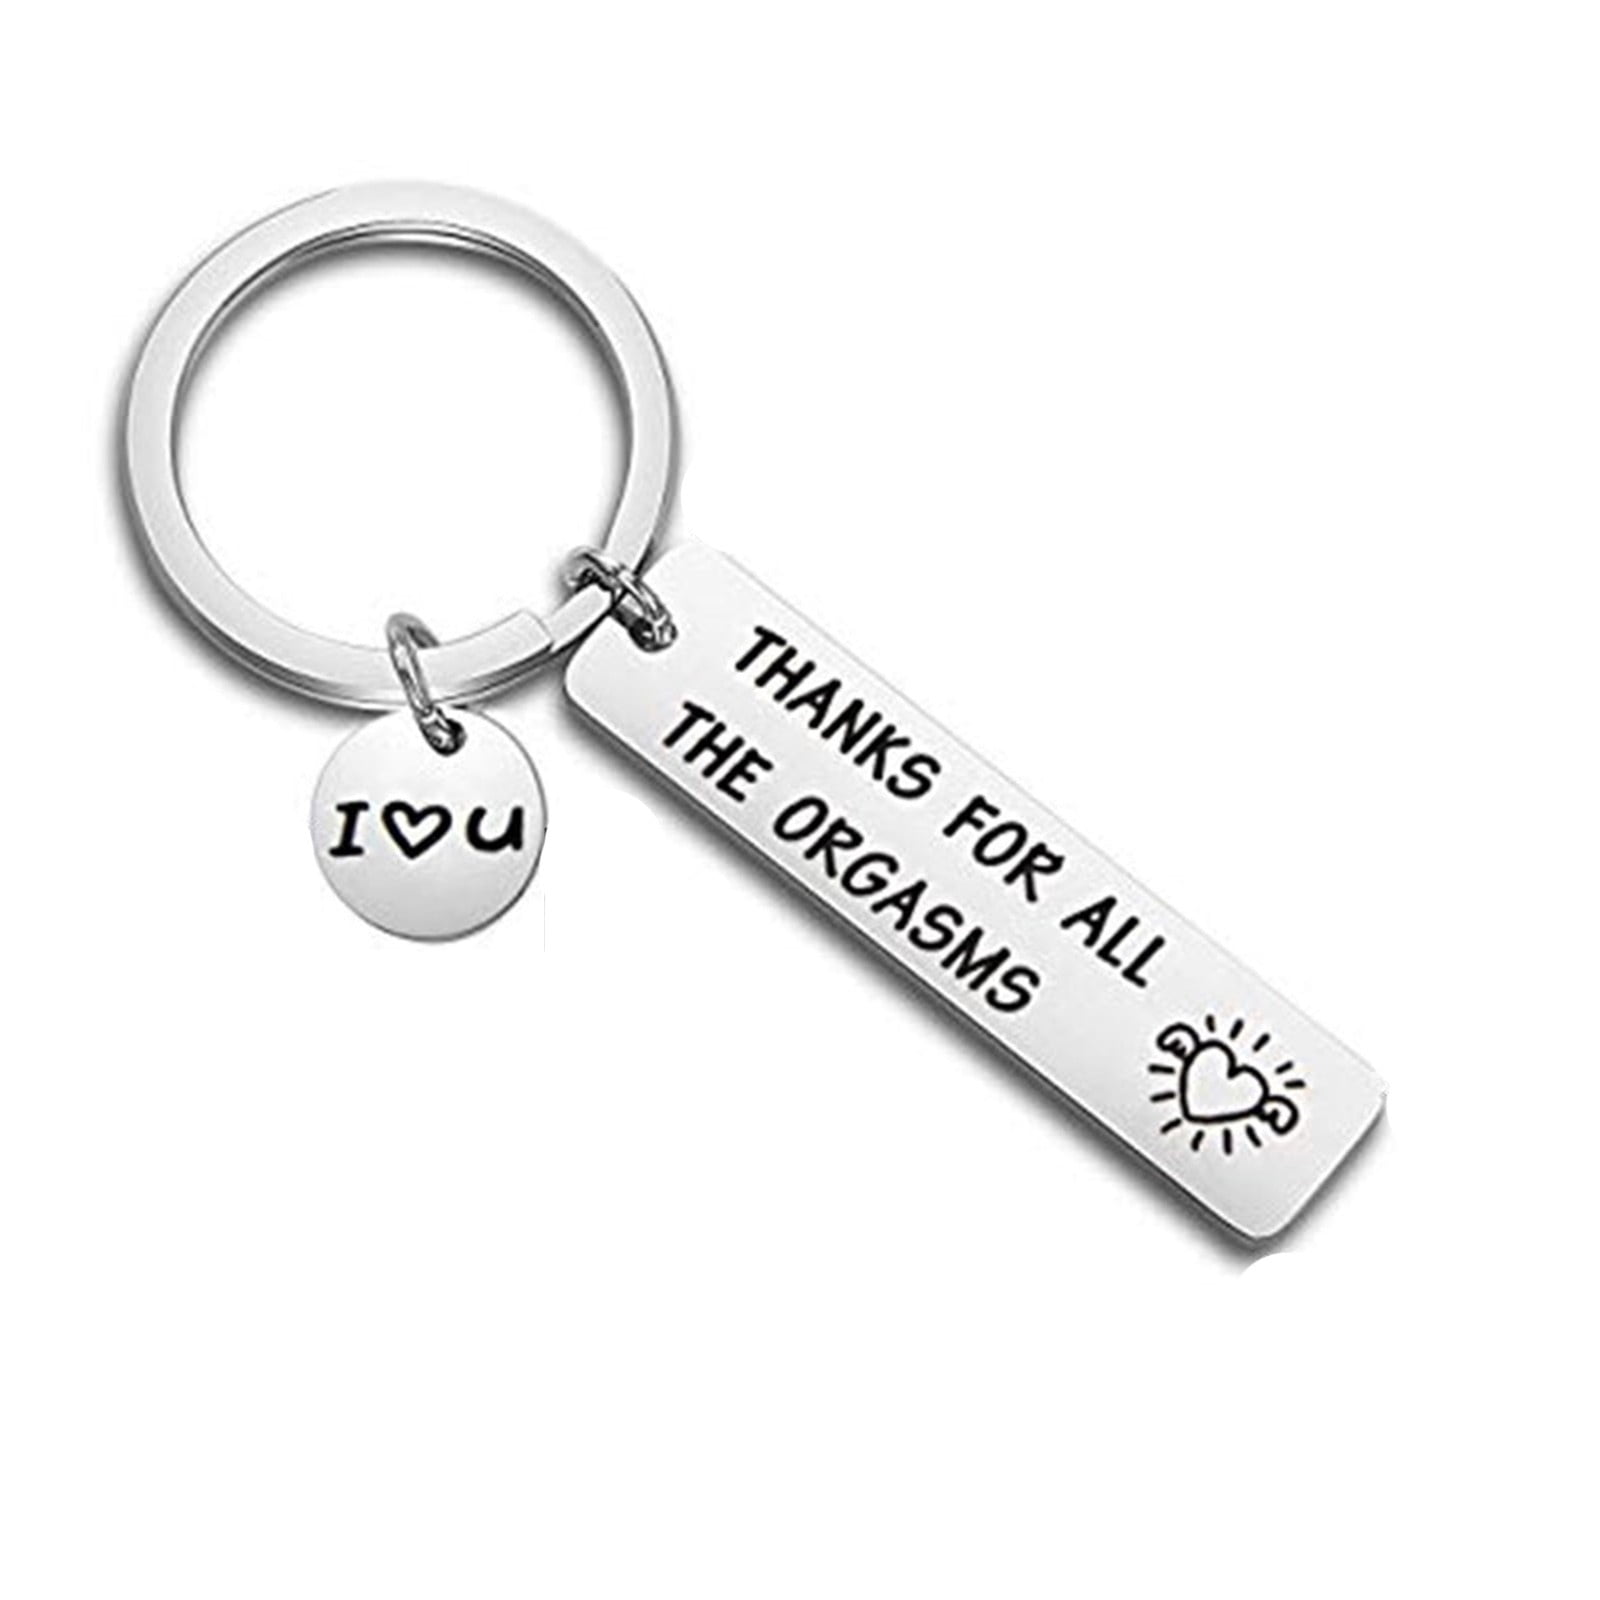 Details about   Woodcraft Mini Folding Rule Key Chain Attached 